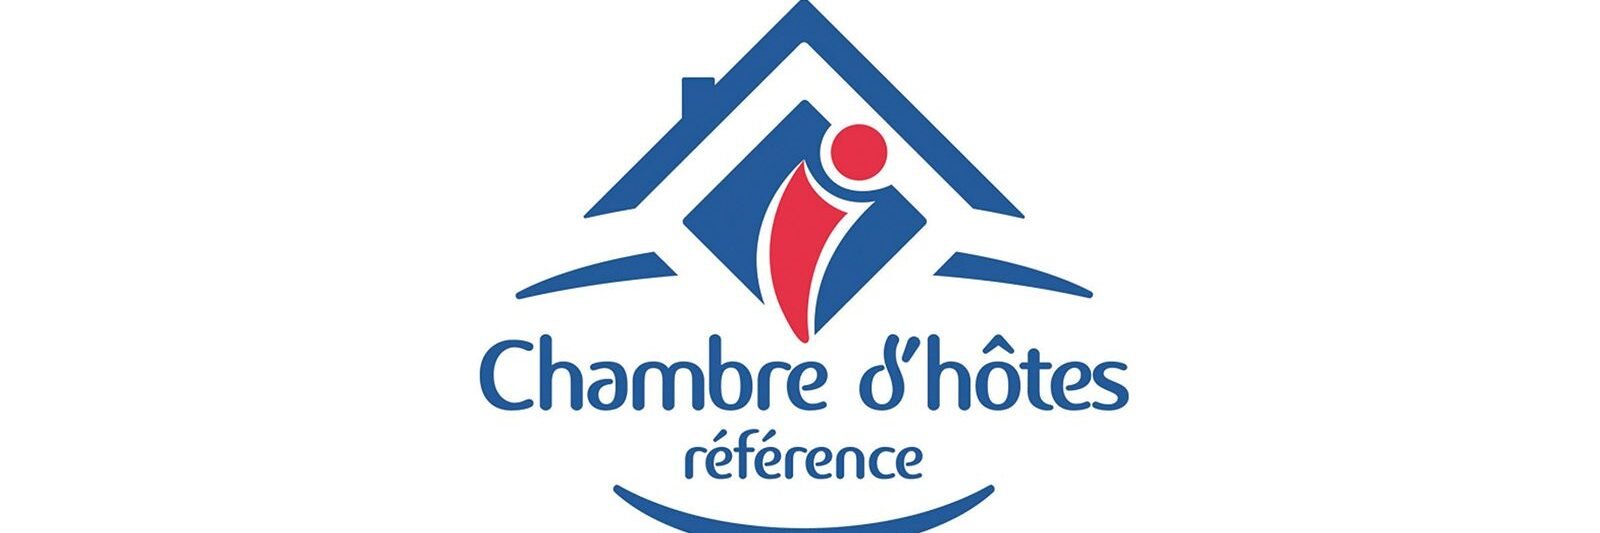 Logo Chambre dhotes reference 2